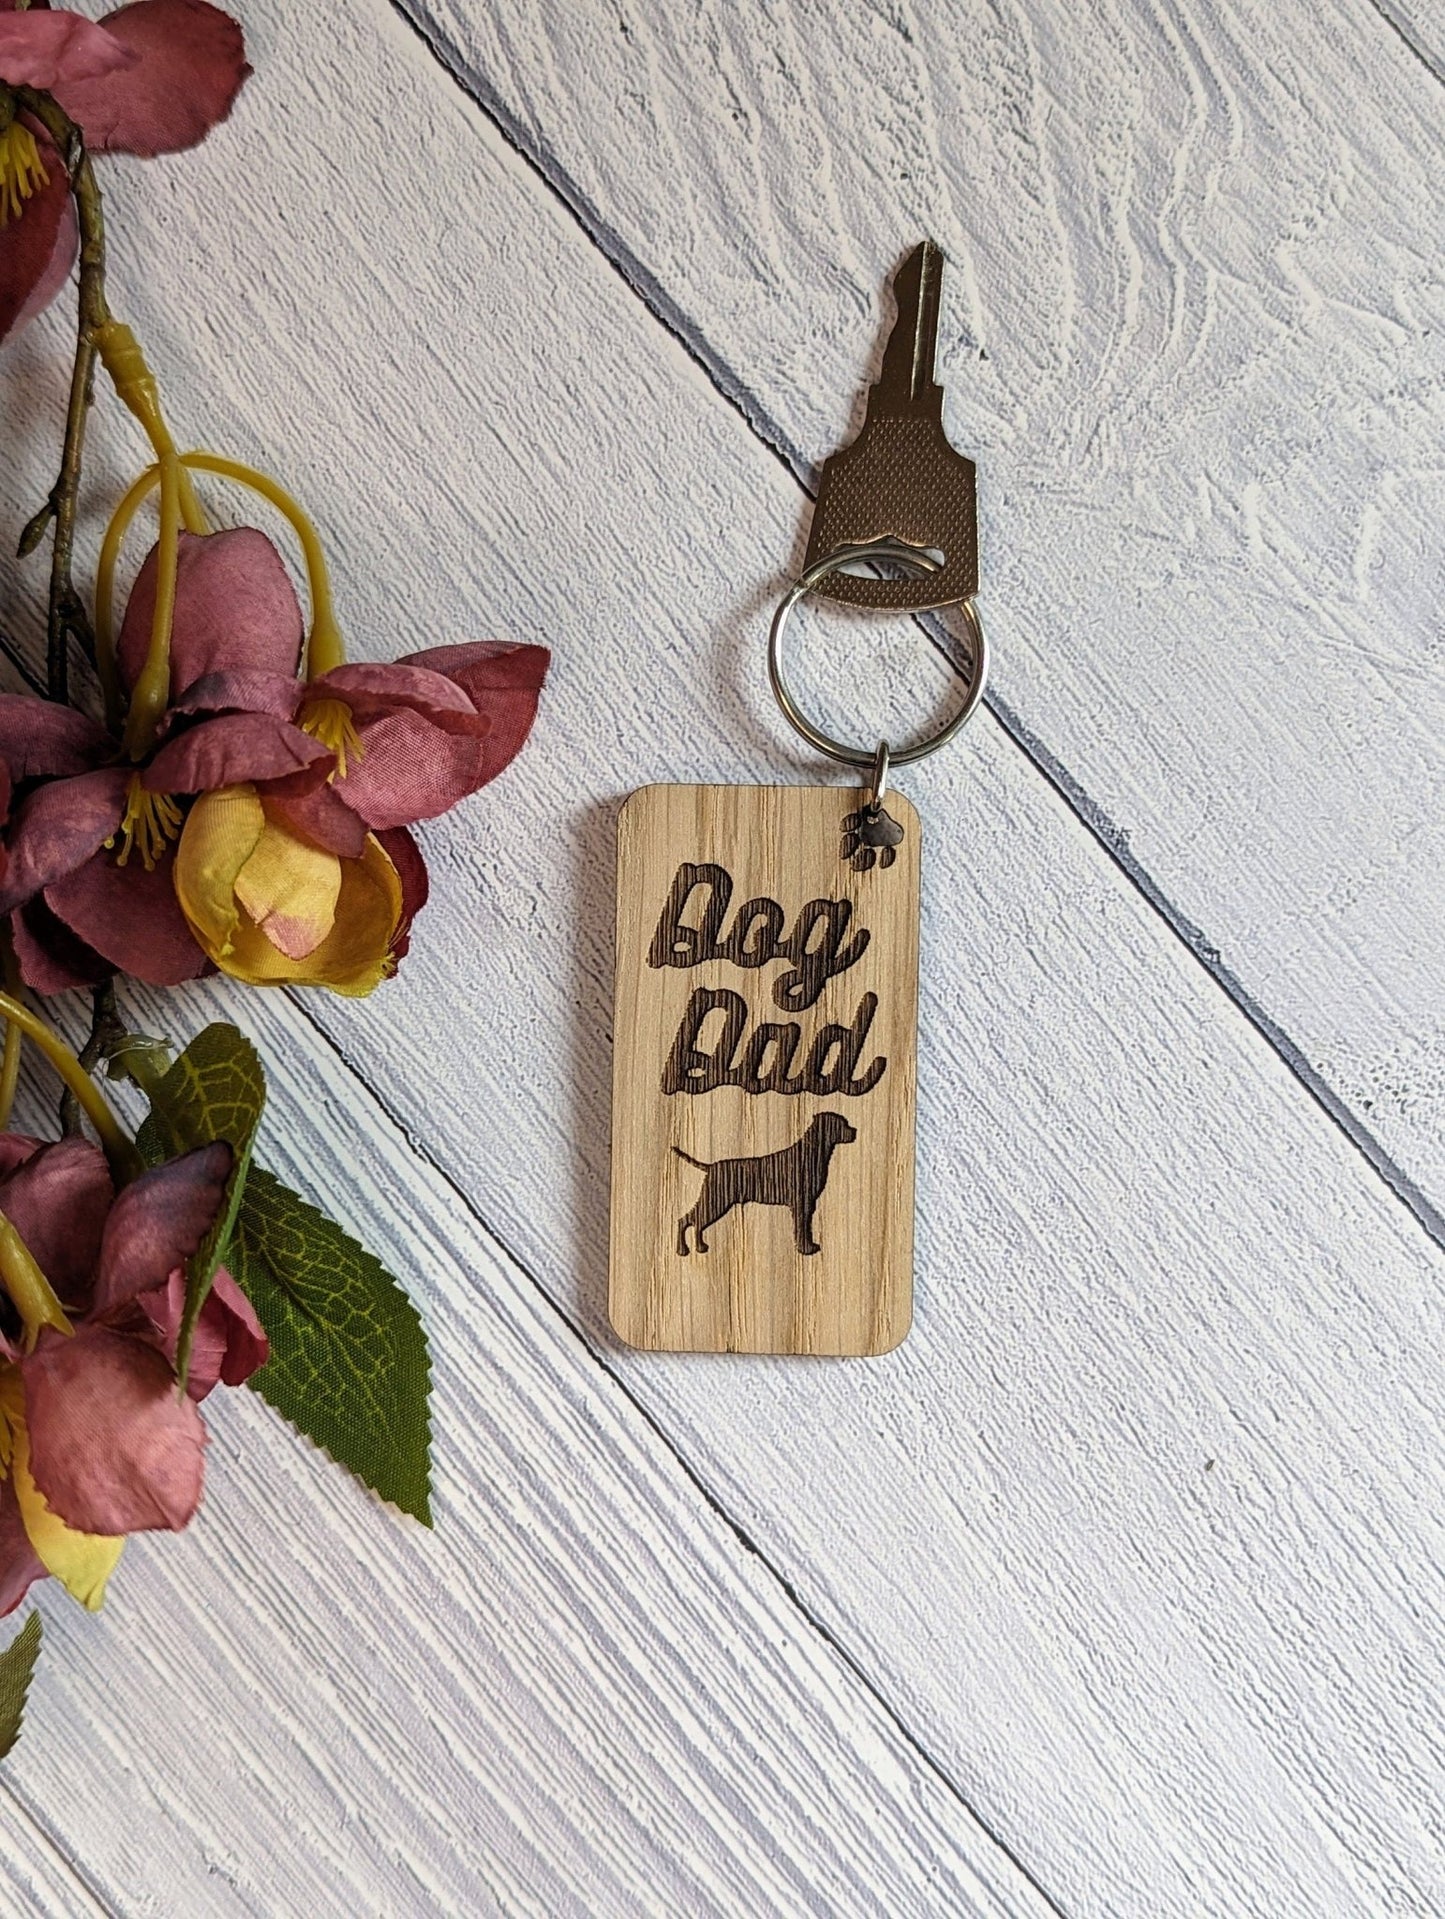 Personalised Rottweiler Dog Dad Wooden Keyring | Oak Dog Keychain | Gift For Rottweiler Parent | Doggy Key Tag Gift - CherryGroveCraft